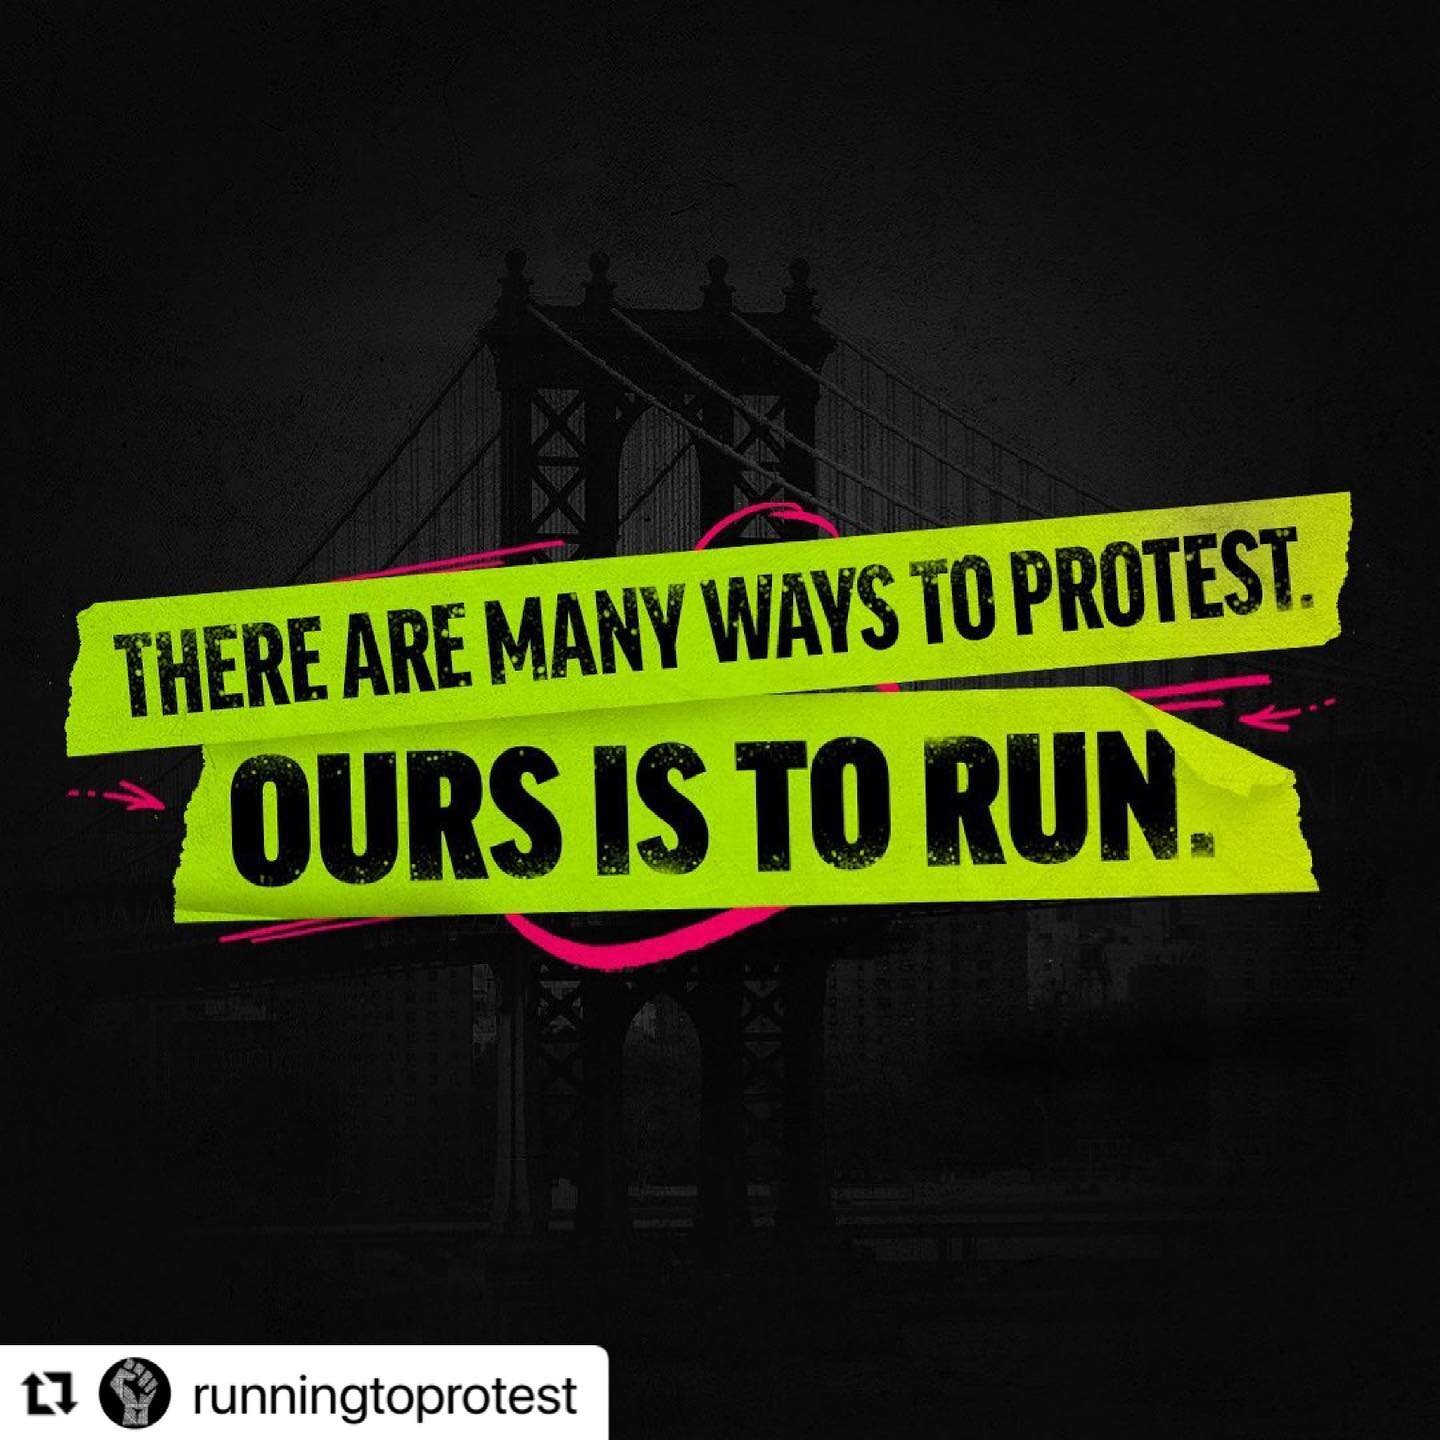 #Repost @runningtoprotest with @make_repost
・・・
On the night of Juneteenth, we&rsquo;ll be bridging gaps in many ways within the running community as it relates to runner safety.

We want you to know that we&rsquo;ll be crossing a bridge via the road